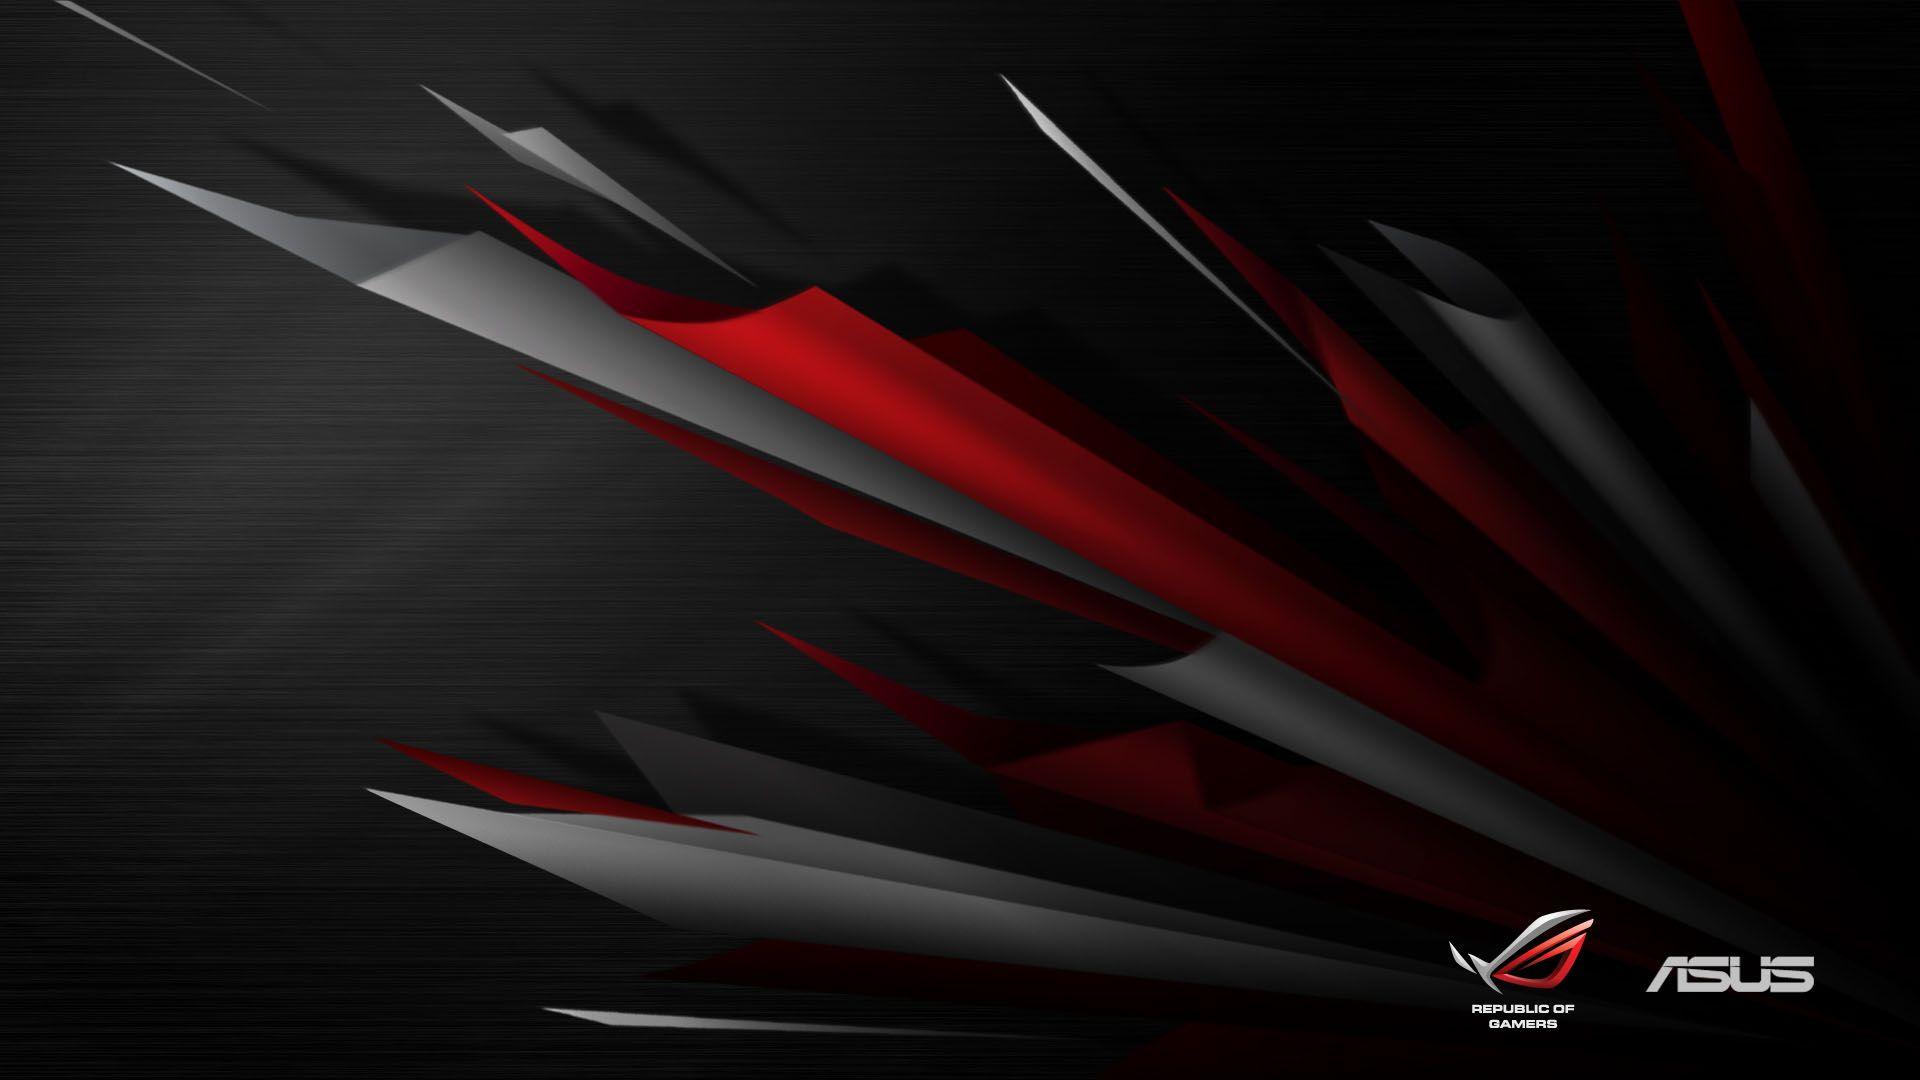 ROG of Gamers｜Global. The Choice of Champions. Wallpaper pc, Technology wallpaper, Desktop picture